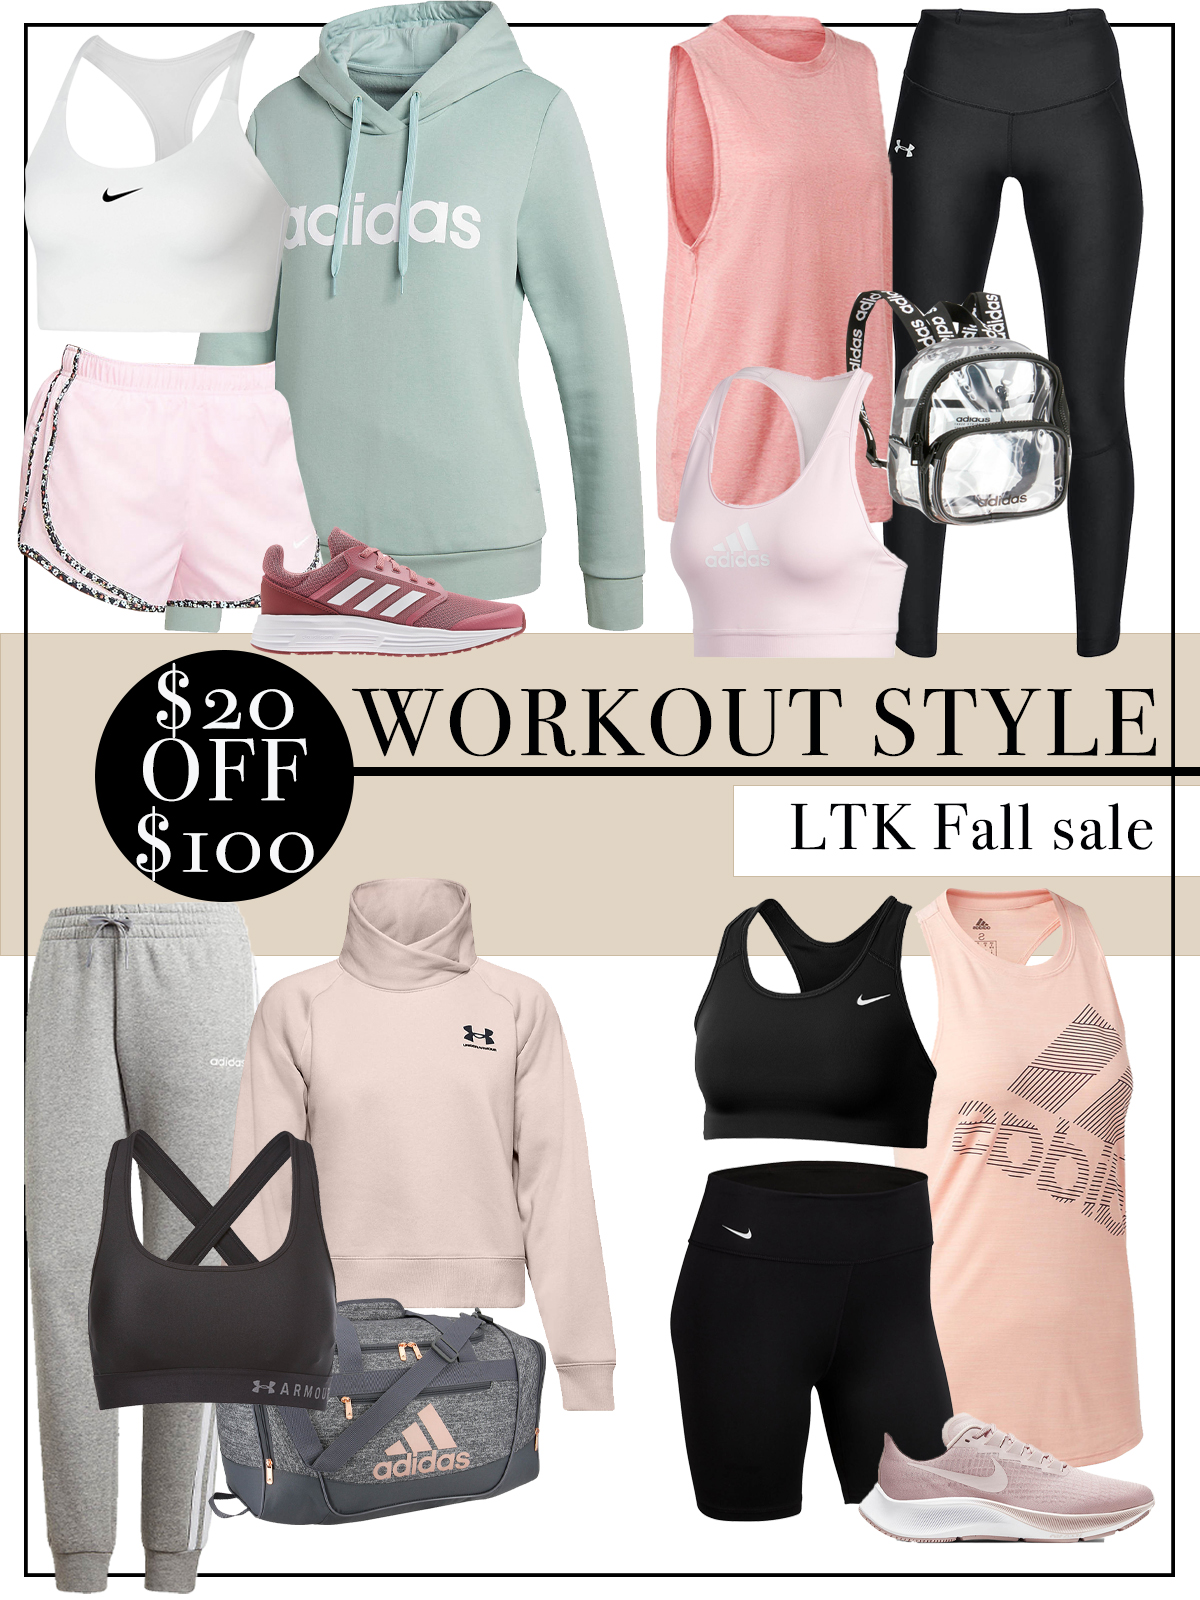 ACADEMY workout outfit inspiration and ideas. 